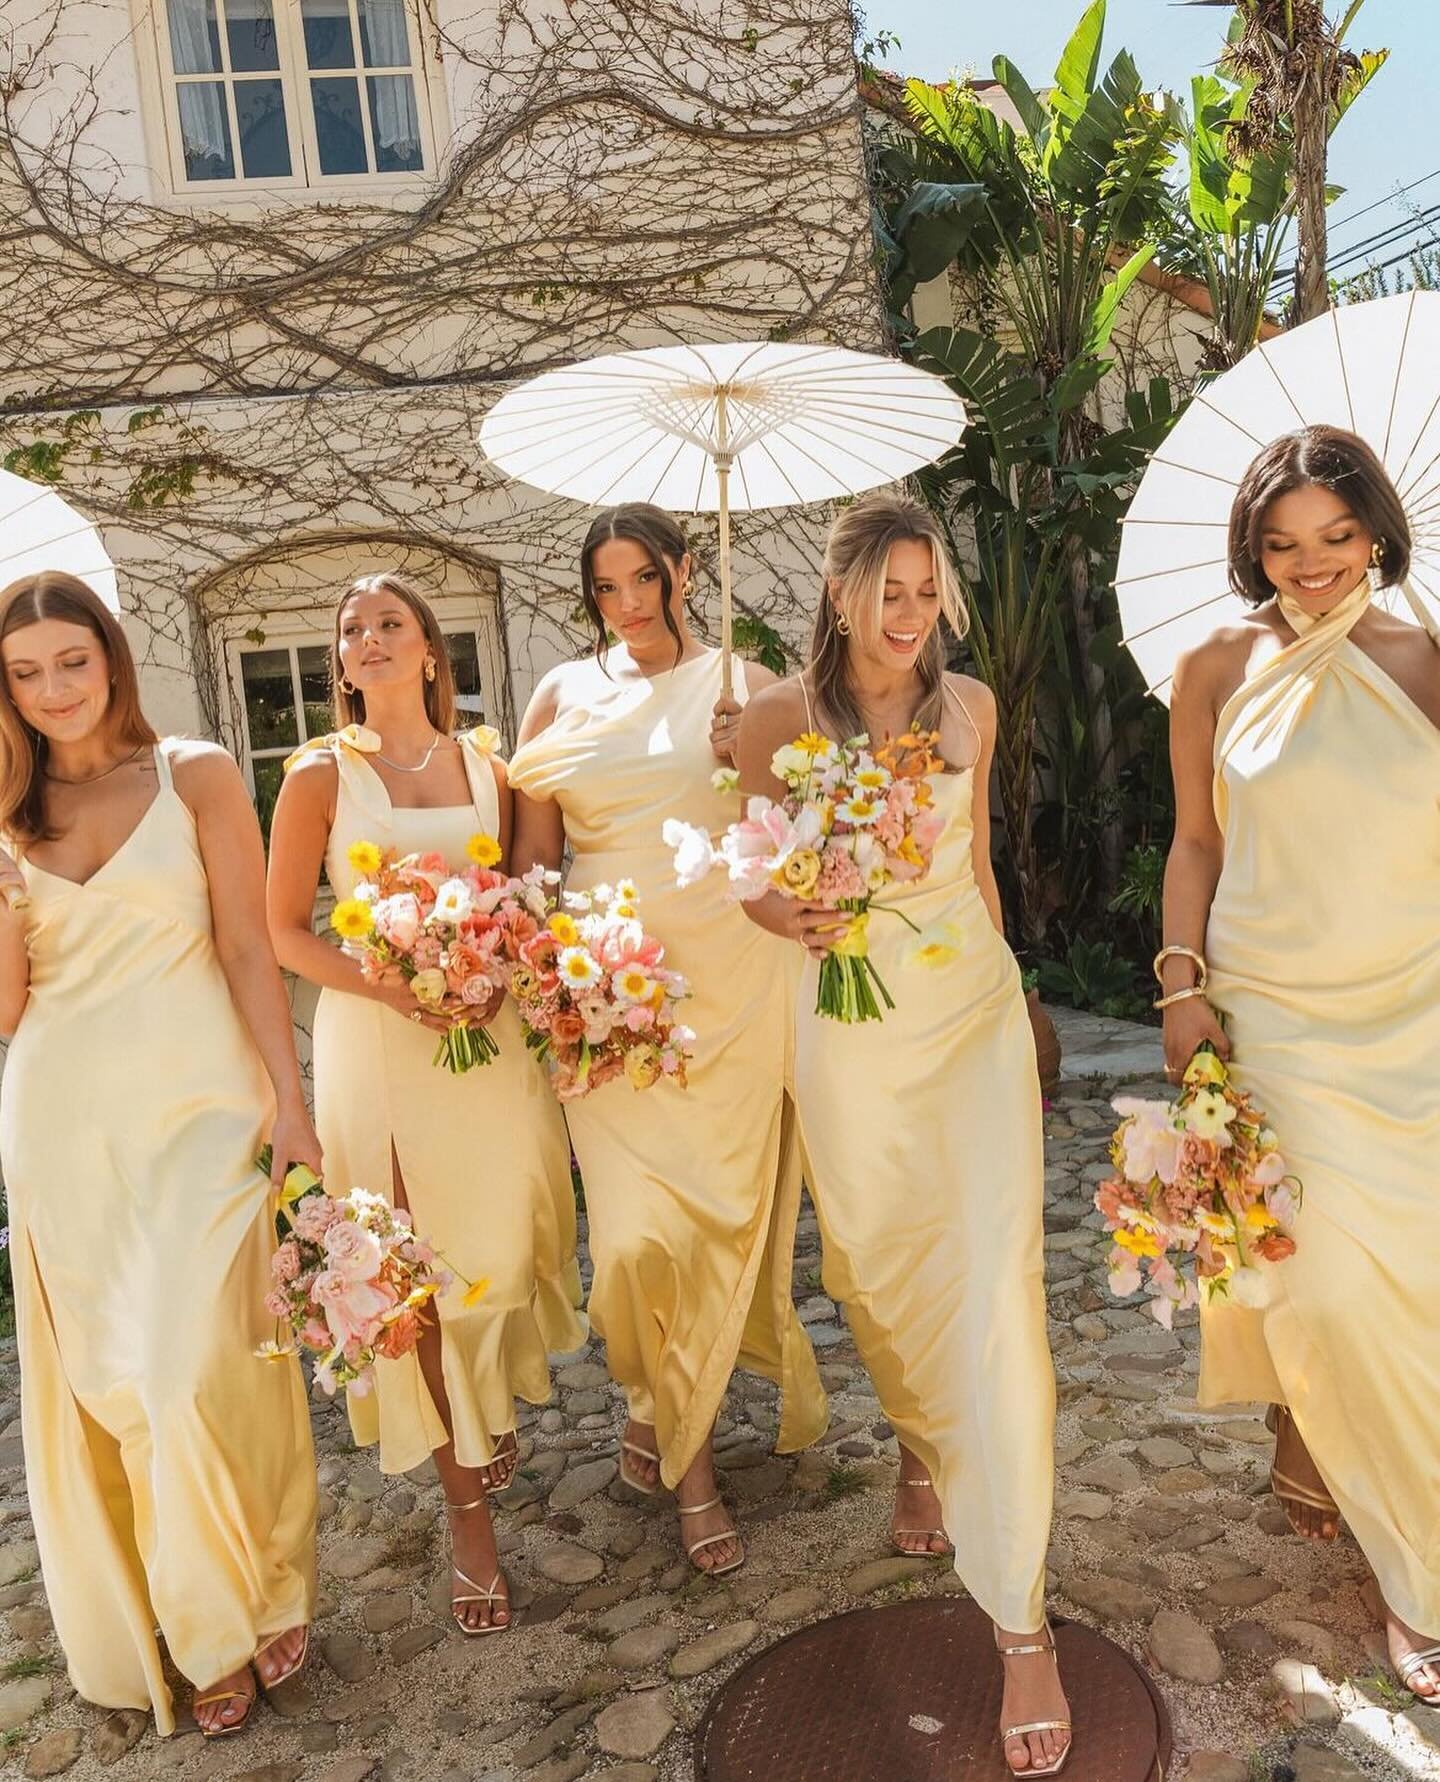 summer 2024 #aandbabes, it&rsquo;s your time to shine! 🥂 drop in with your wedding countdown below so we can celebrate you &amp; save this post for all things summer wedding inspiration! &hearts;

#summerwedding #summerbride #2025bride #2025bride #b